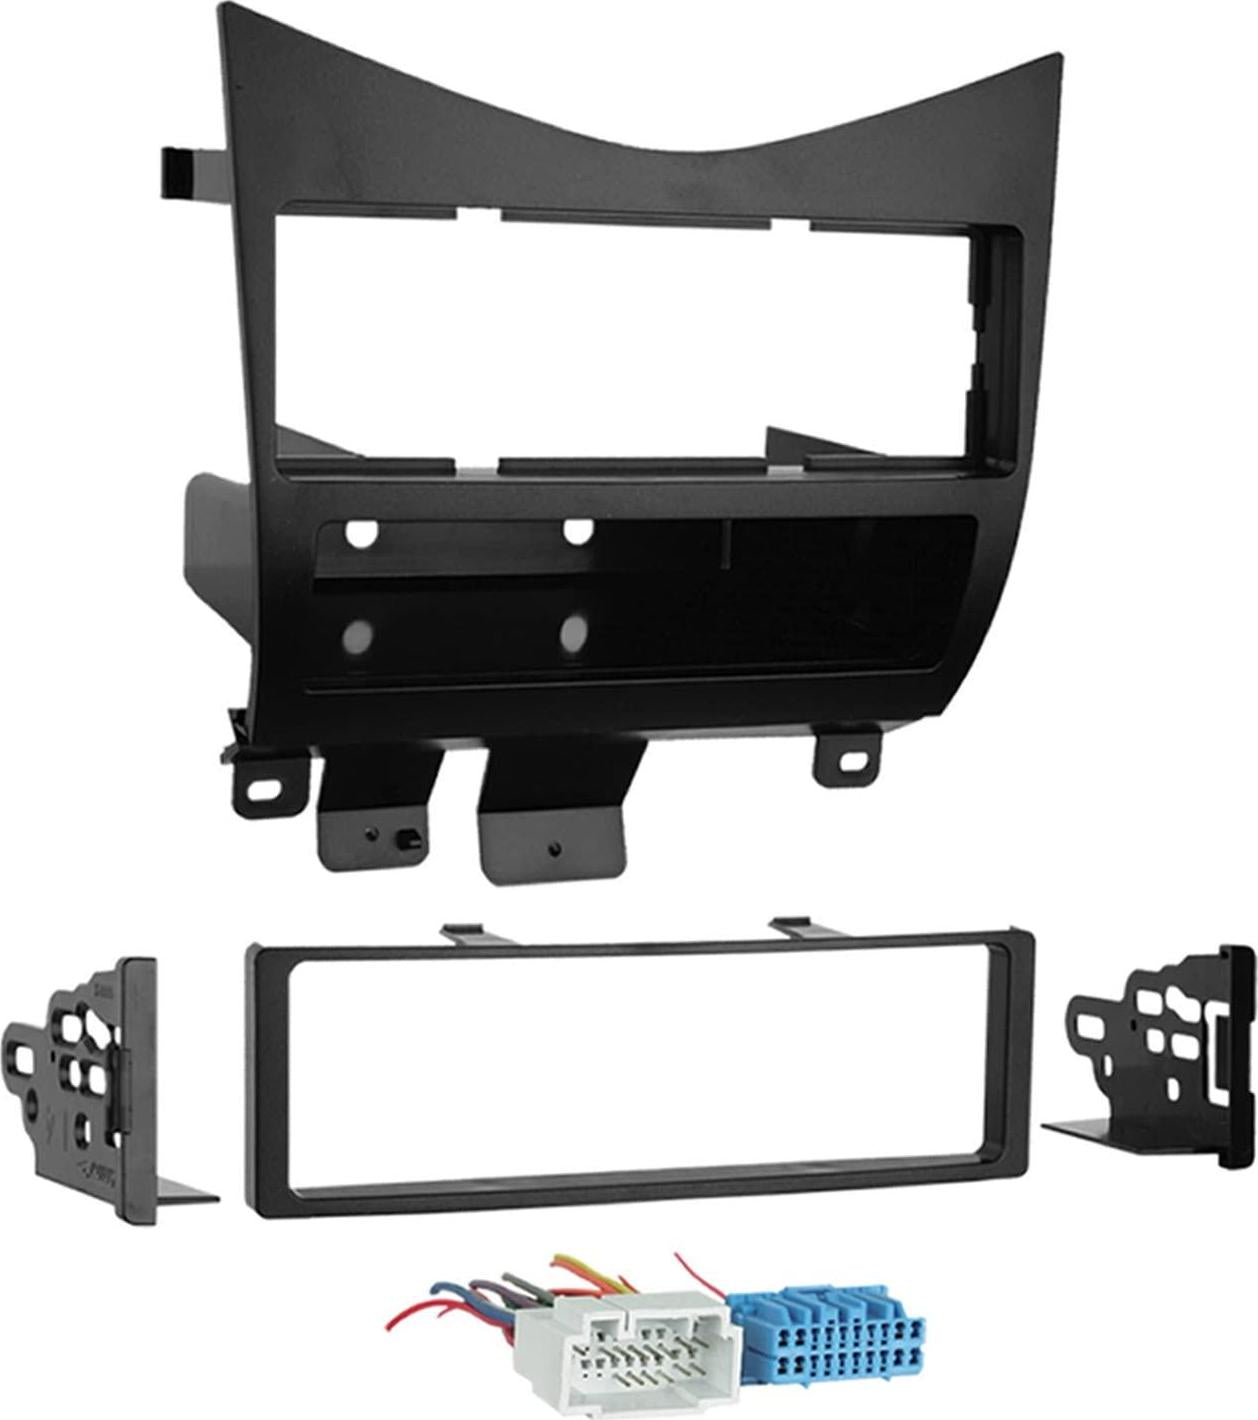 Metra Electronics, Metra 99-7862 Lower Dash Single DIN Installation Kit for 2003-2004 Honda Accord with Wire Harness